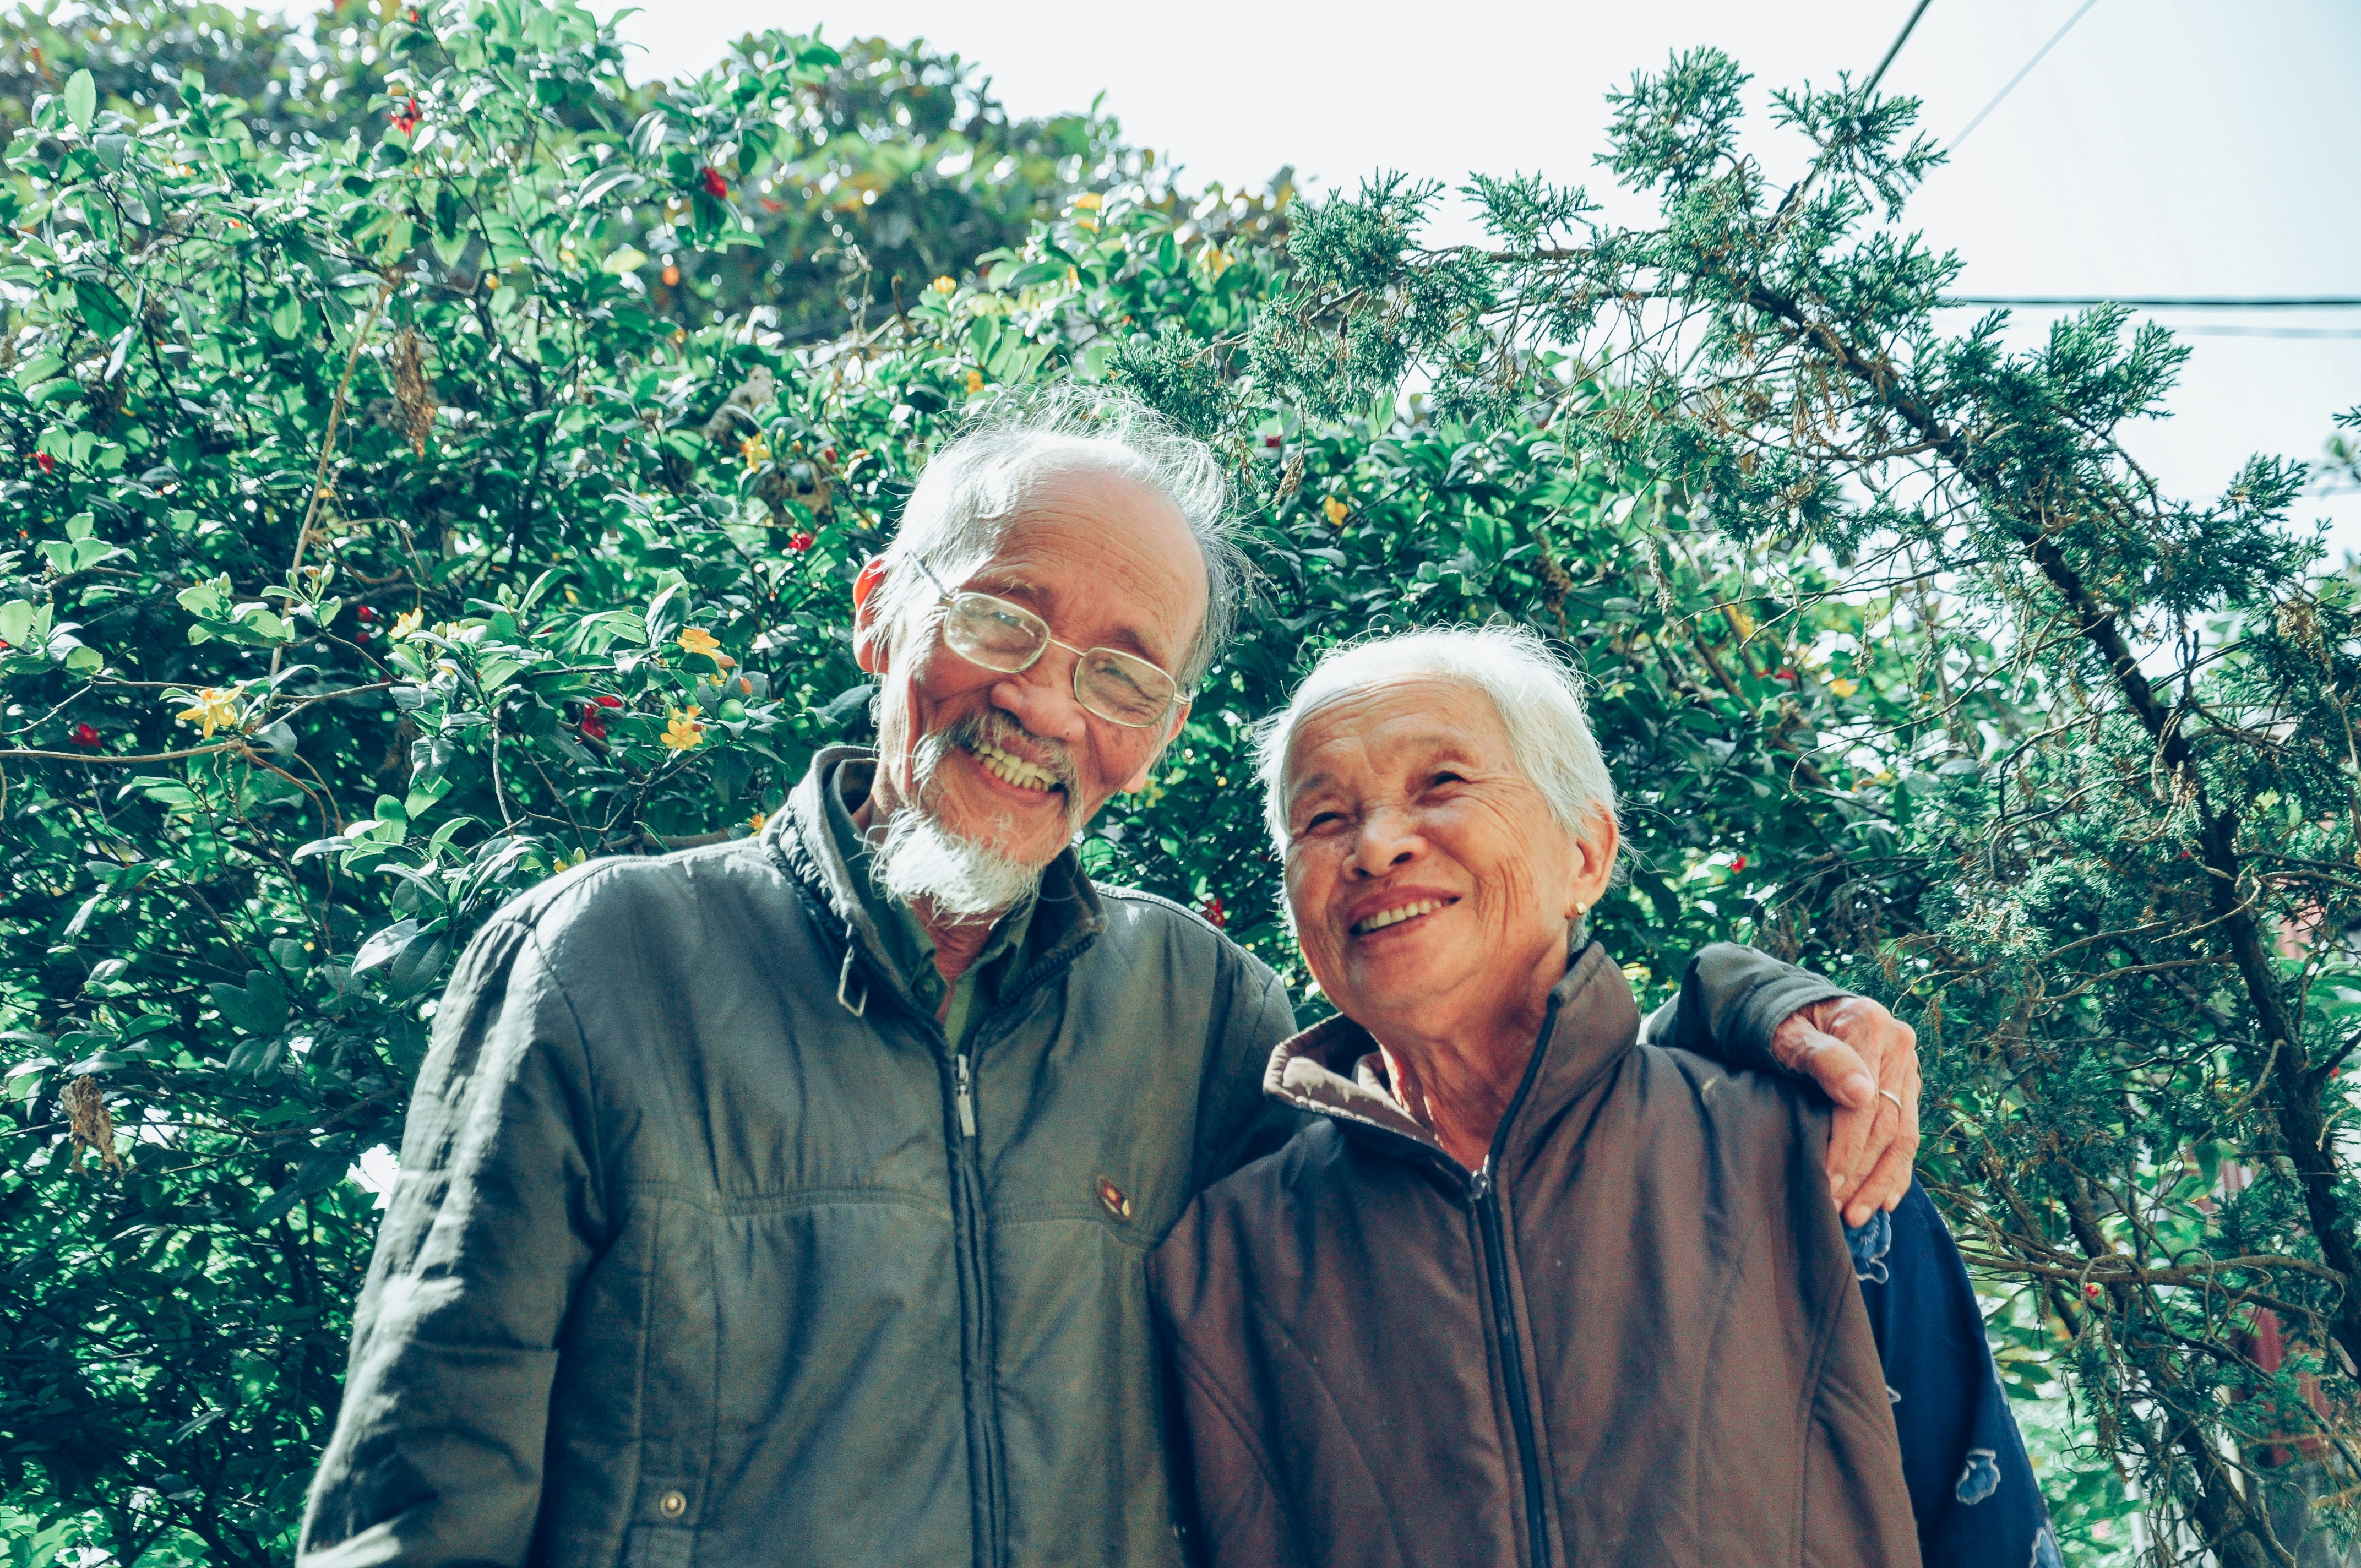 Senior couple smiling, the man's arm is on the woman's shoulder as they pose outdoors. 